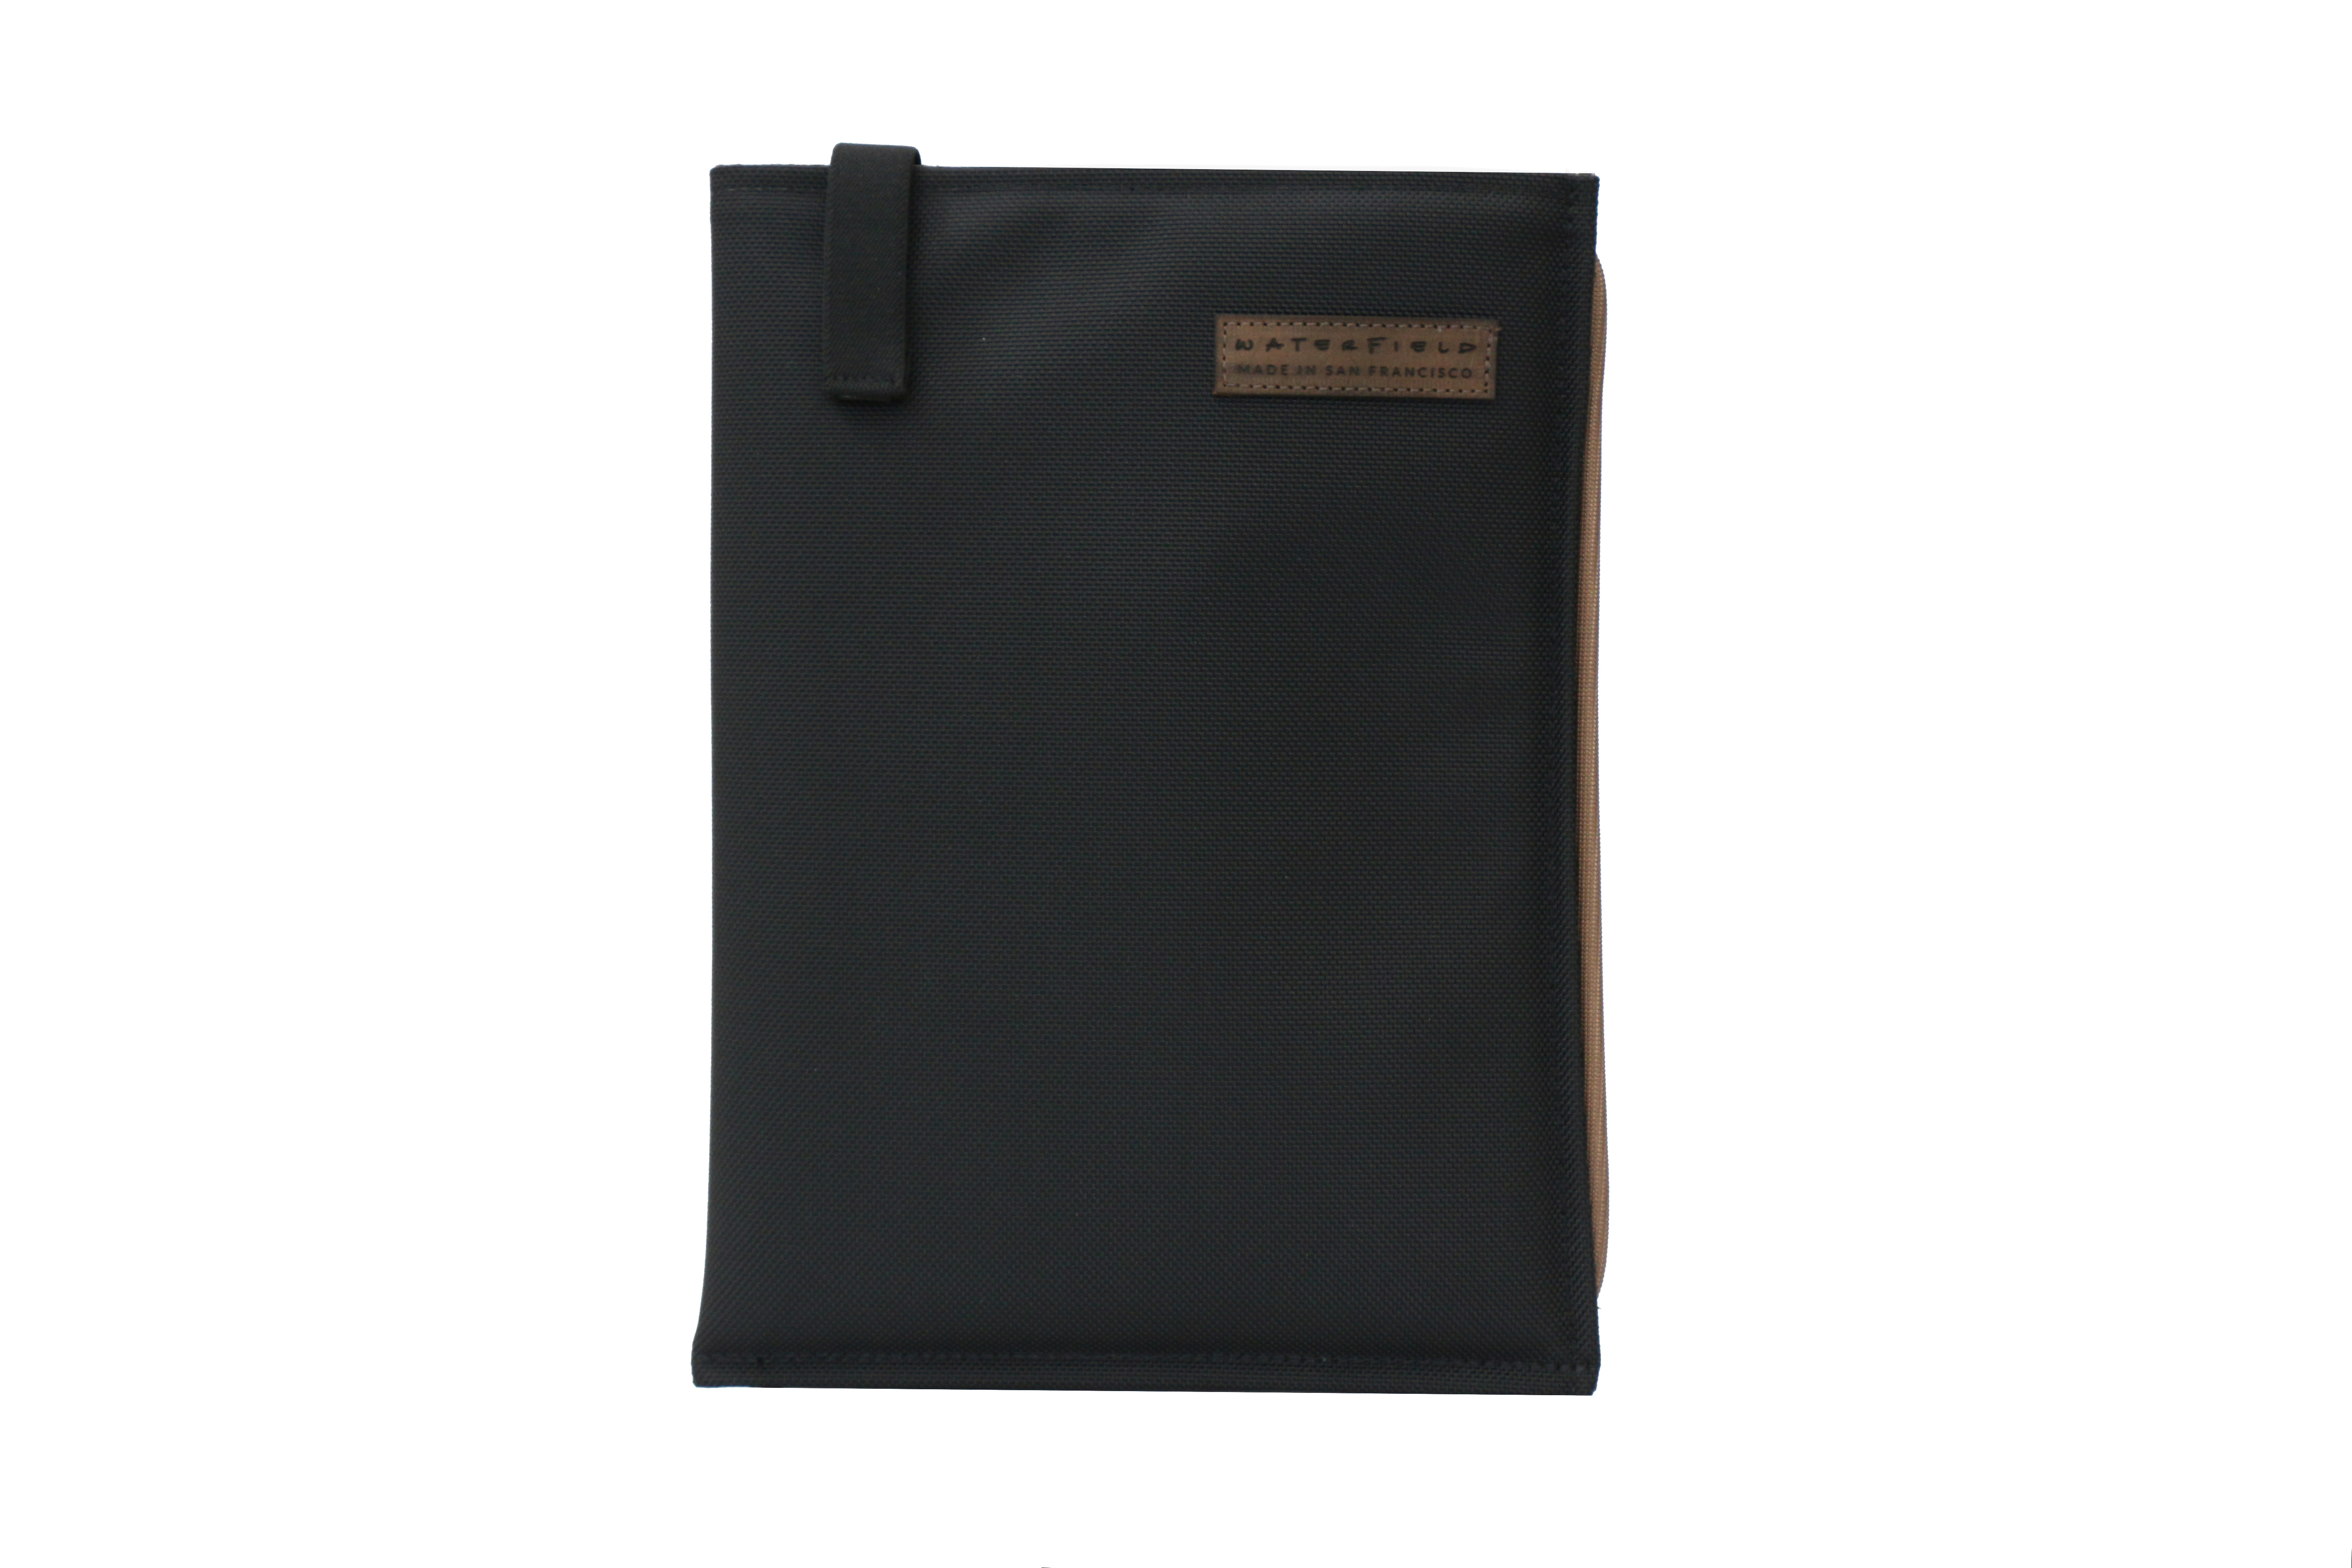 DASH Surface Pro 4 or Surface Book Sleeve